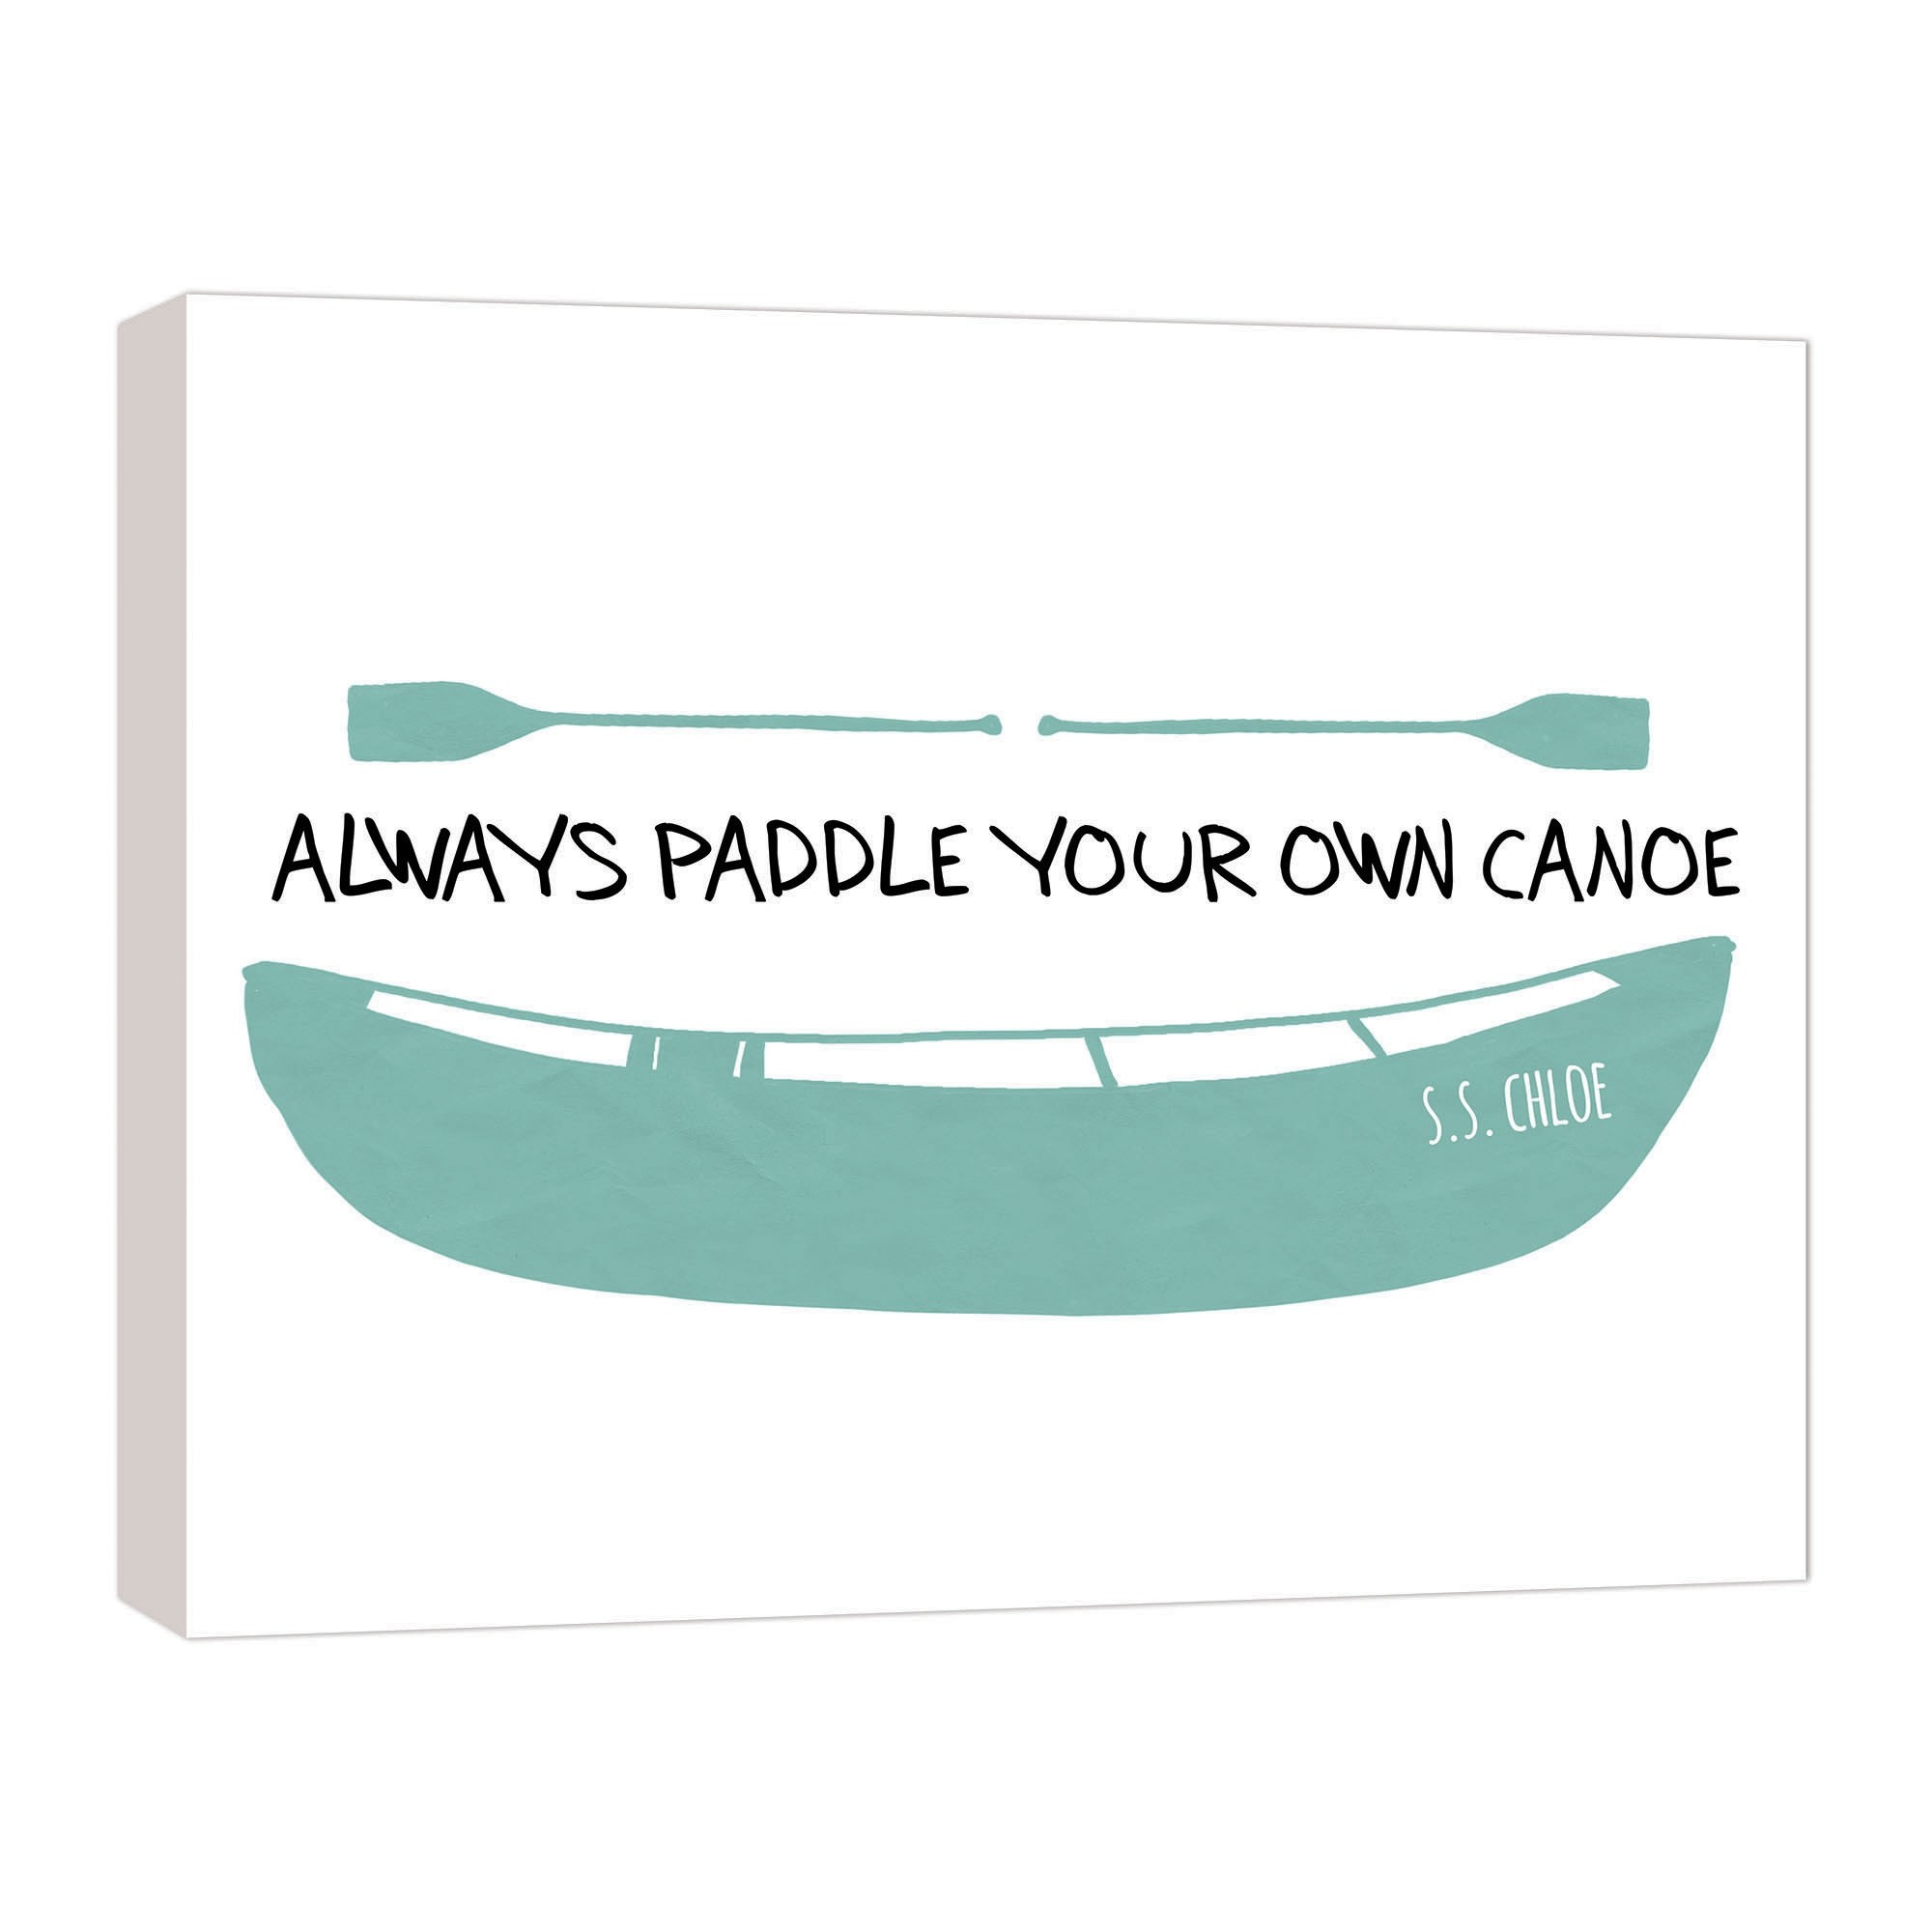 Paddle Your Own Canoe 20x16 Personalized Canvas Wall Art